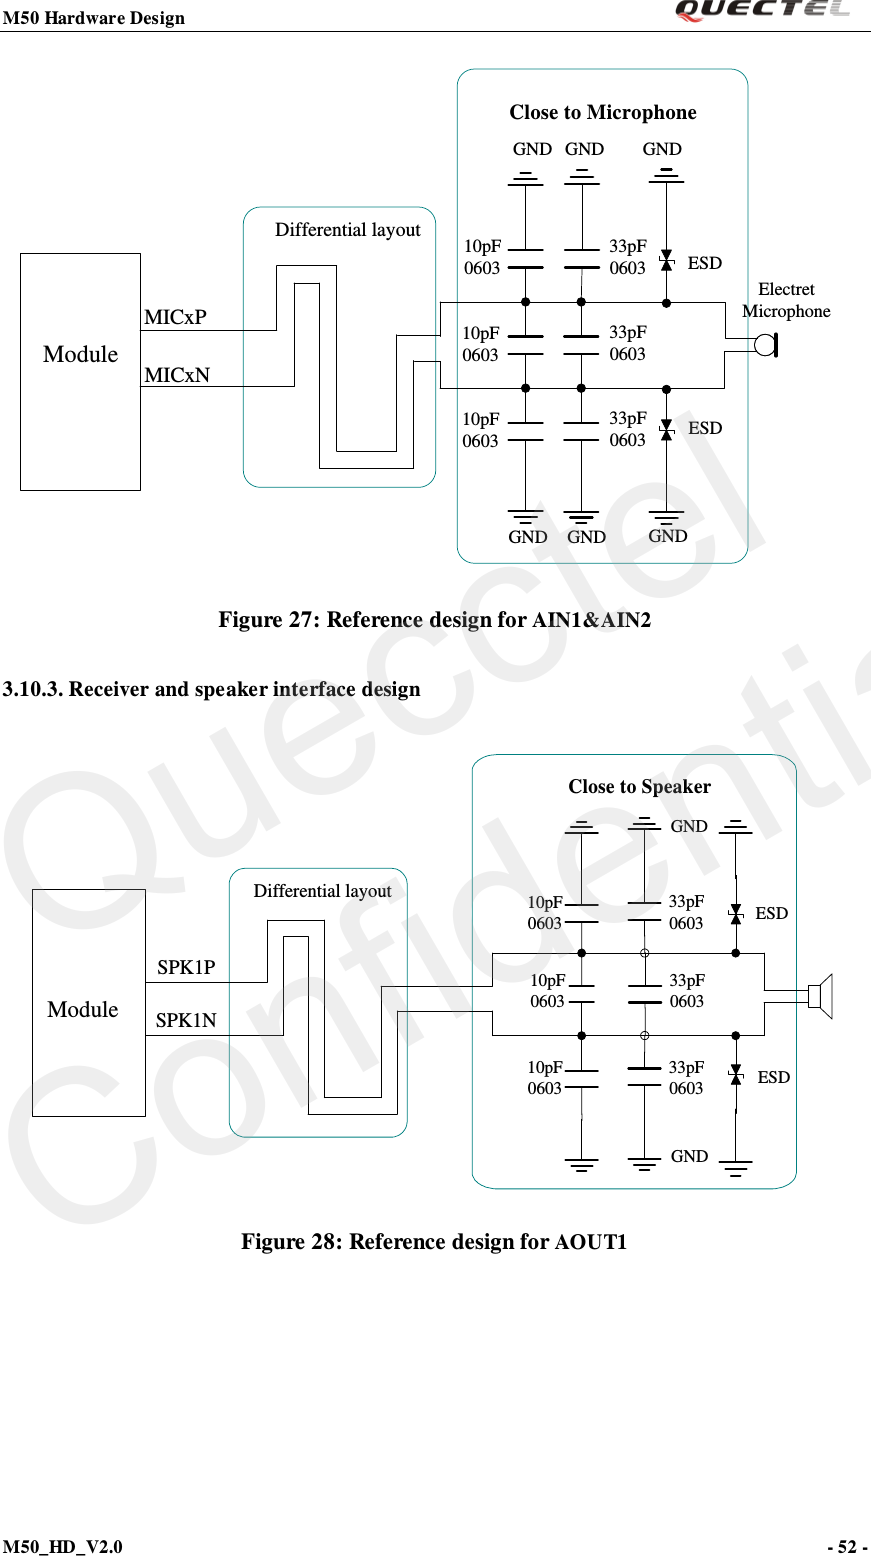 M50 Hardware Design                                                                M50_HD_V2.0                                                                      - 52 -   Close to MicrophoneMICxPMICxNGNDGNDDifferential layoutModuleElectret MicrophoneGNDGND GNDGNDESD ESD10pF060310pF060310pF060333pF060333pF060333pF0603 Figure 27: Reference design for AIN1&amp;AIN2 3.10.3. Receiver and speaker interface design SPK1PSPK1NDifferential layout 10pF060310pF060333pF060333pF060333pF0603Close to SpeakerGNDGND10pF0603ESD ESD Module Figure 28: Reference design for AOUT1  Quecctel Confidential